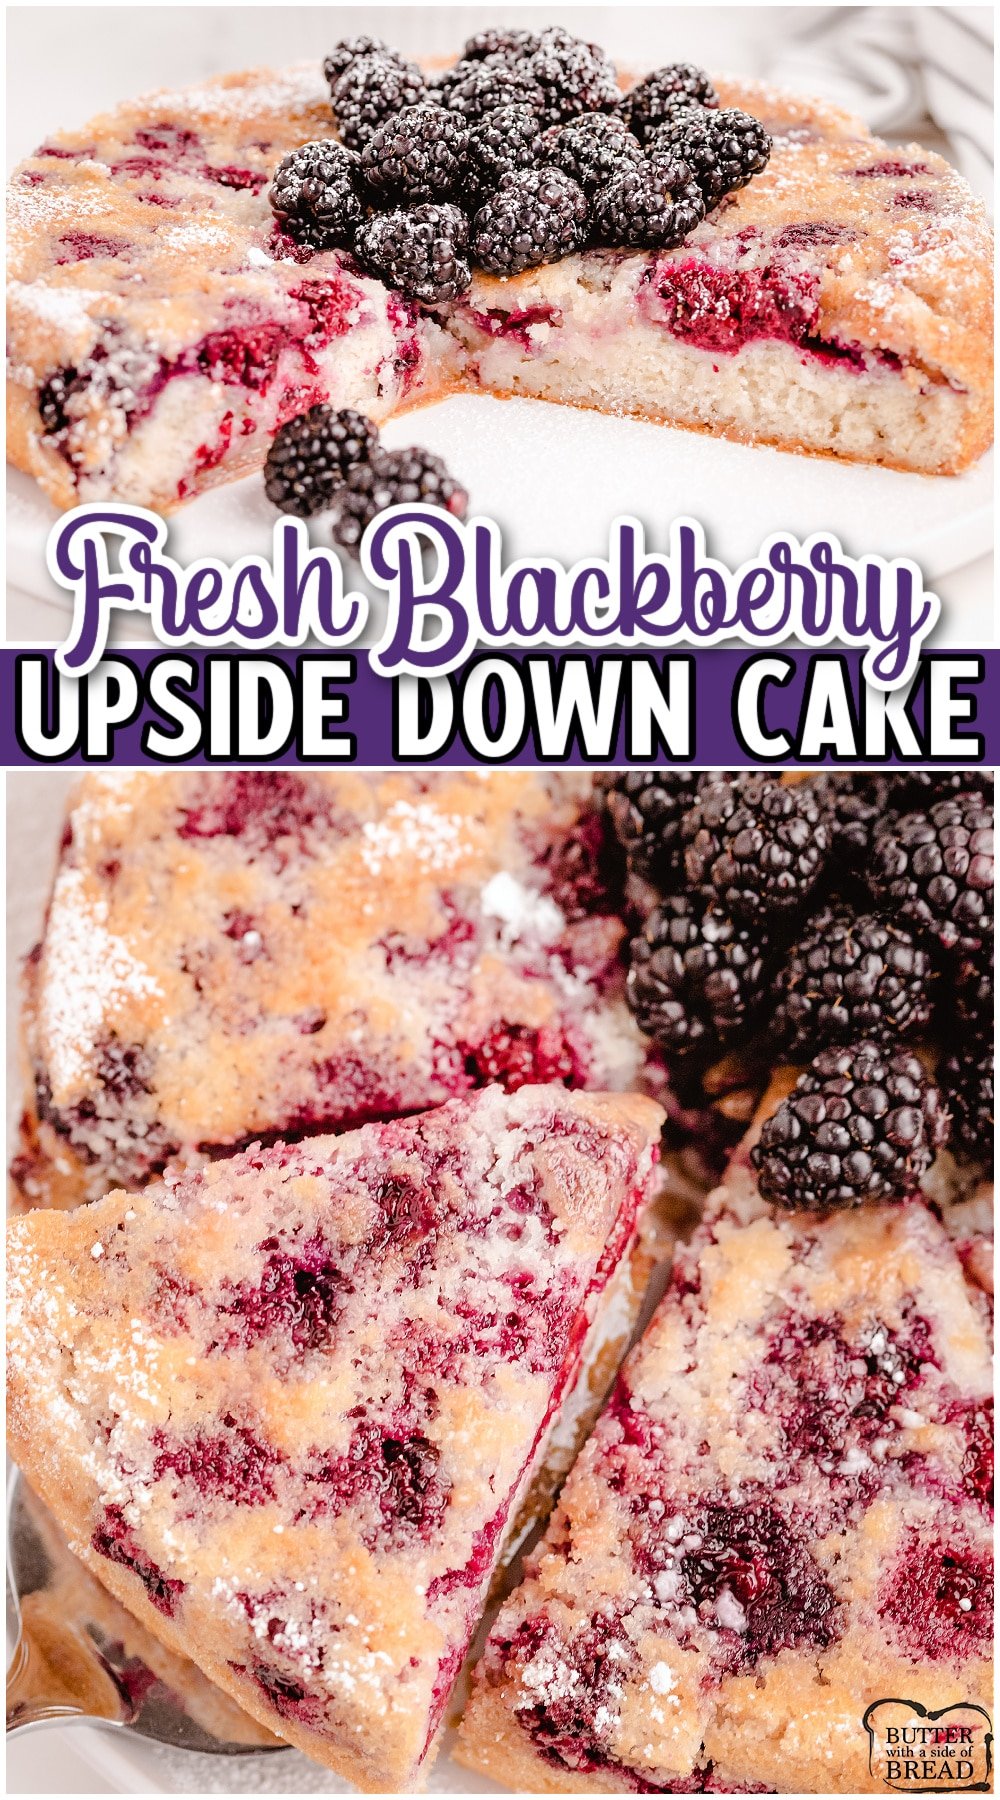 Blackberry Upside down Cake is a delightfully simple blackberry dessert made with just 4 ingredients! This berry cake with cake mix is made easy in minutes & has incredible flavor.